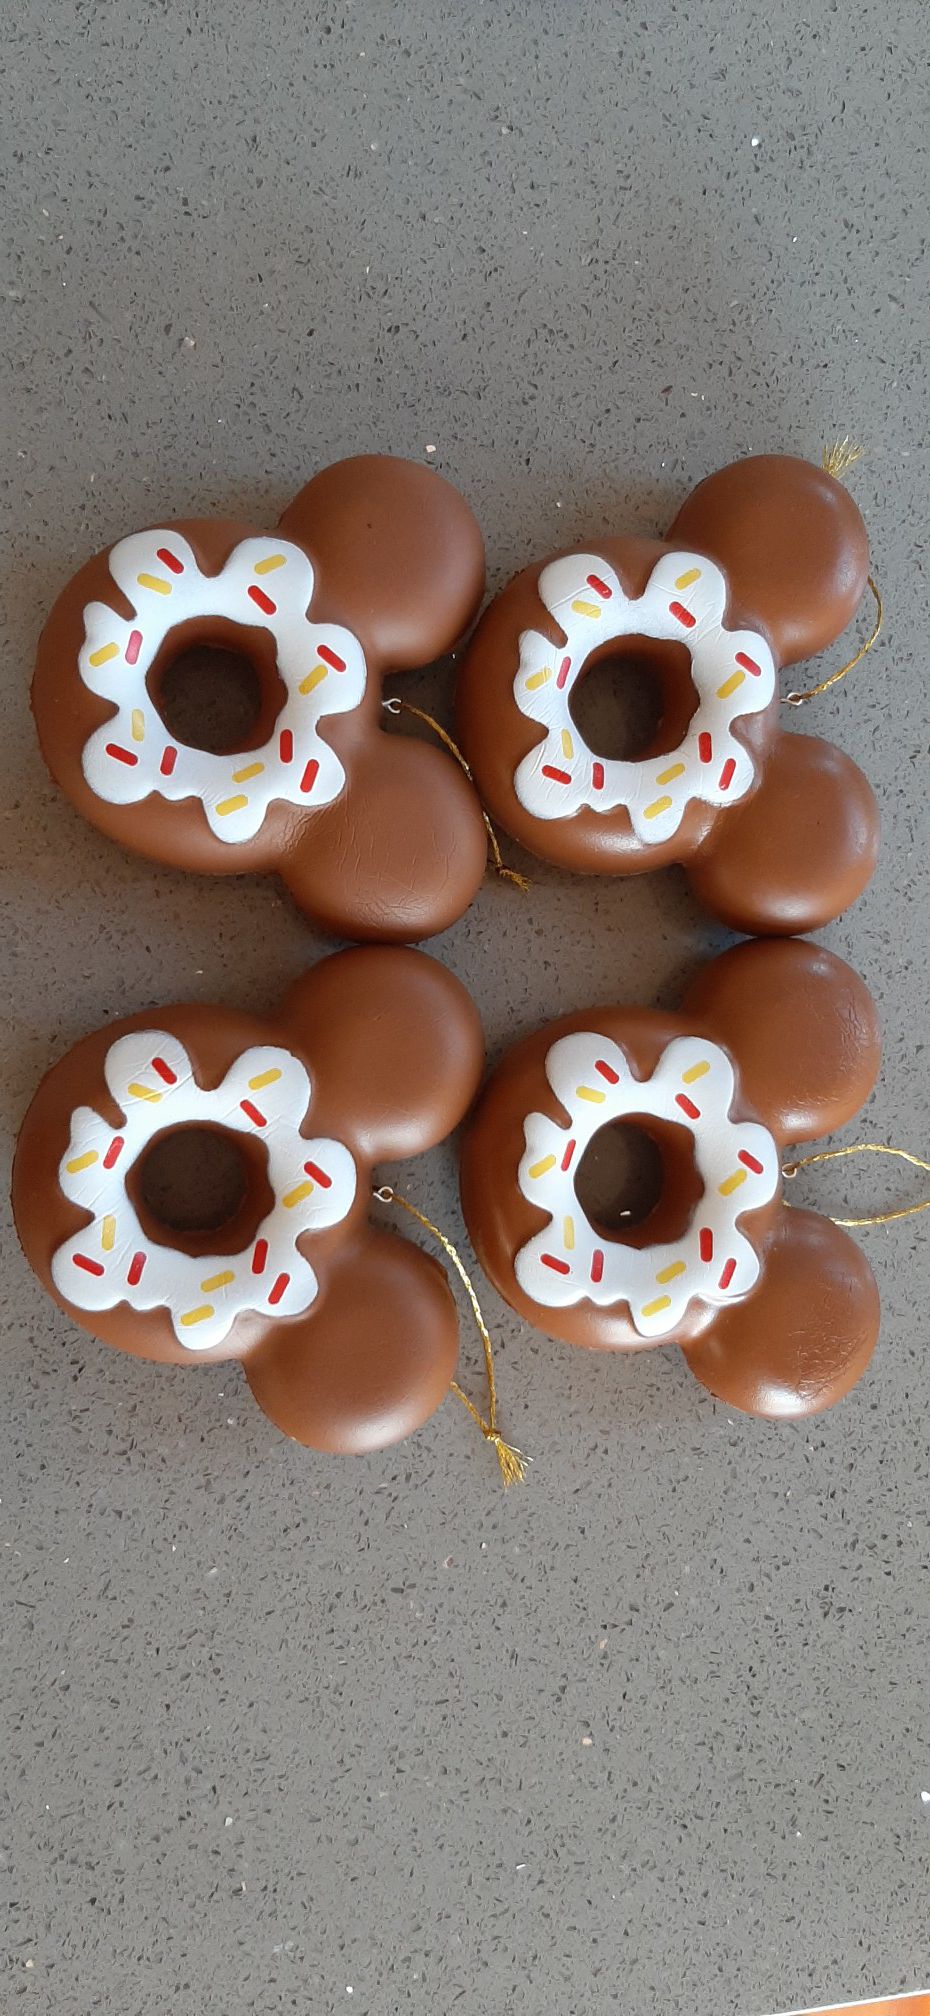 8 Mickey Mouse Donuts Christmas ornaments